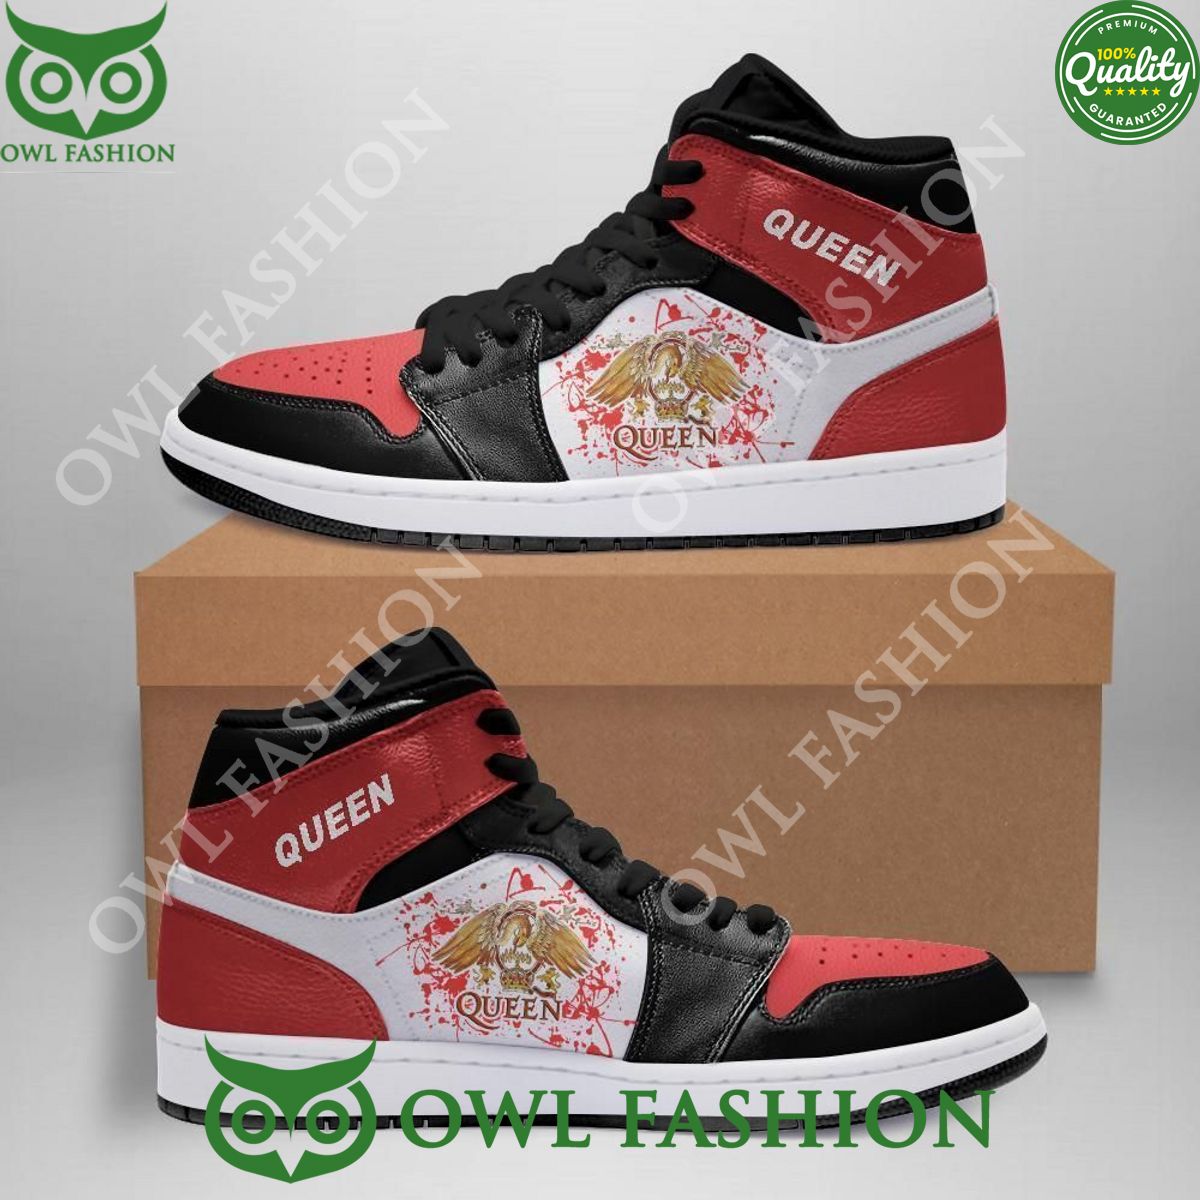 Queen Rock Band Red Limited Air Jordan High Top Shoes